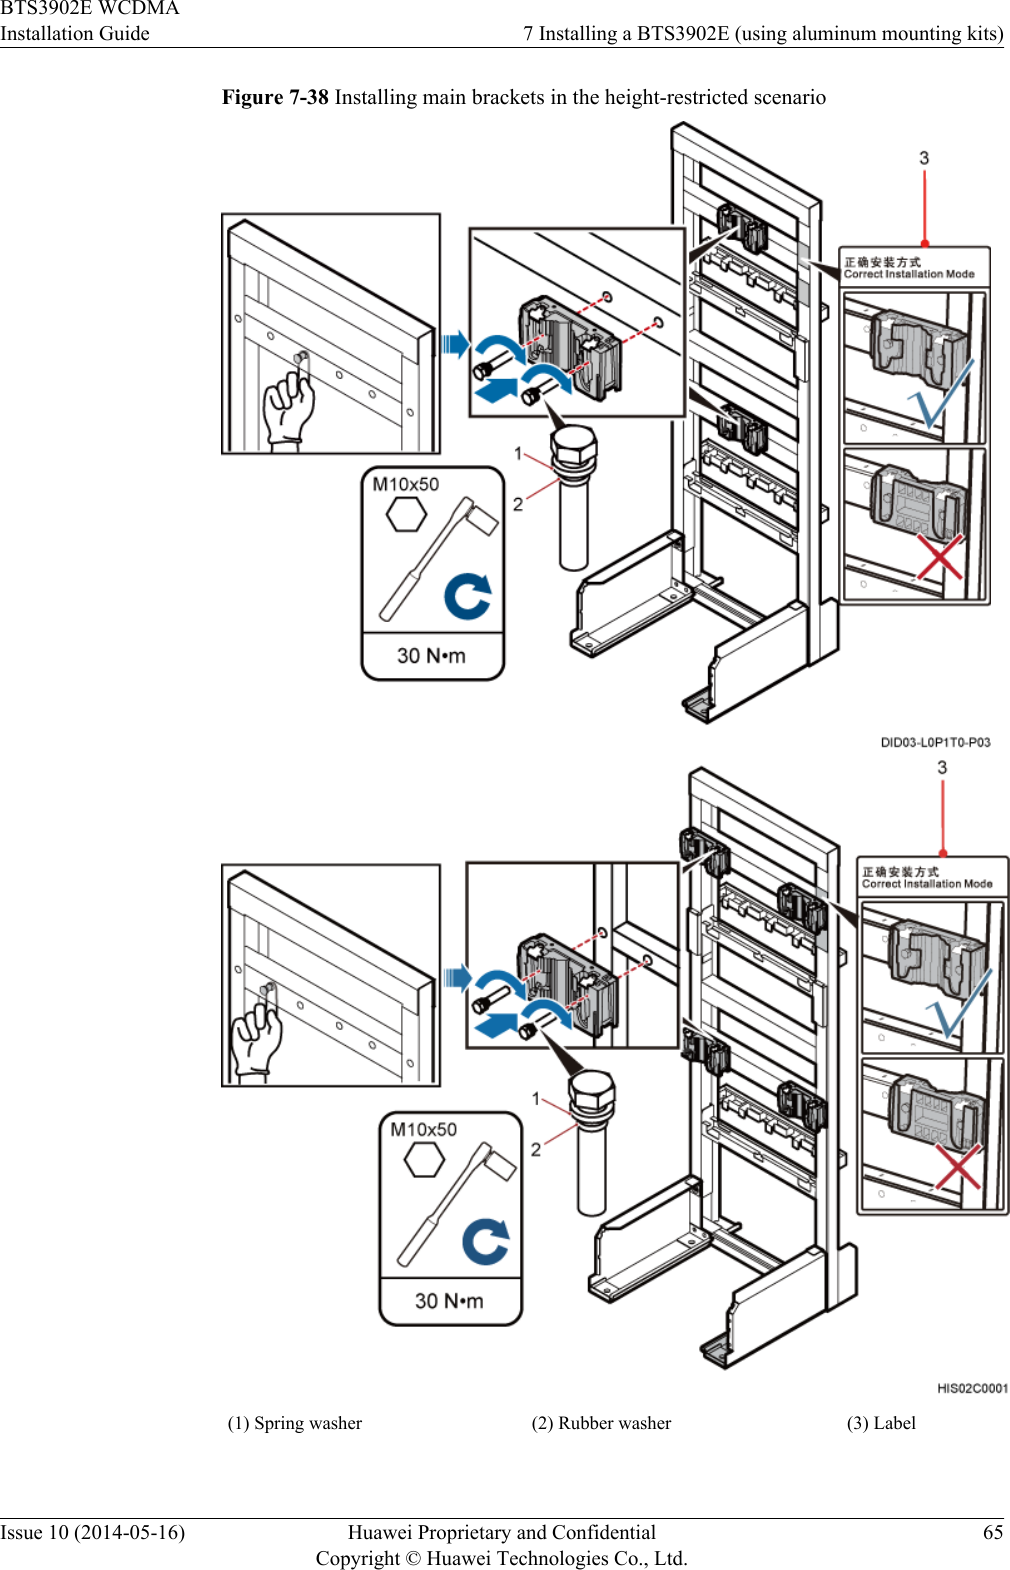 Figure 7-38 Installing main brackets in the height-restricted scenario(1) Spring washer (2) Rubber washer (3) LabelBTS3902E WCDMAInstallation Guide 7 Installing a BTS3902E (using aluminum mounting kits)Issue 10 (2014-05-16) Huawei Proprietary and ConfidentialCopyright © Huawei Technologies Co., Ltd.65